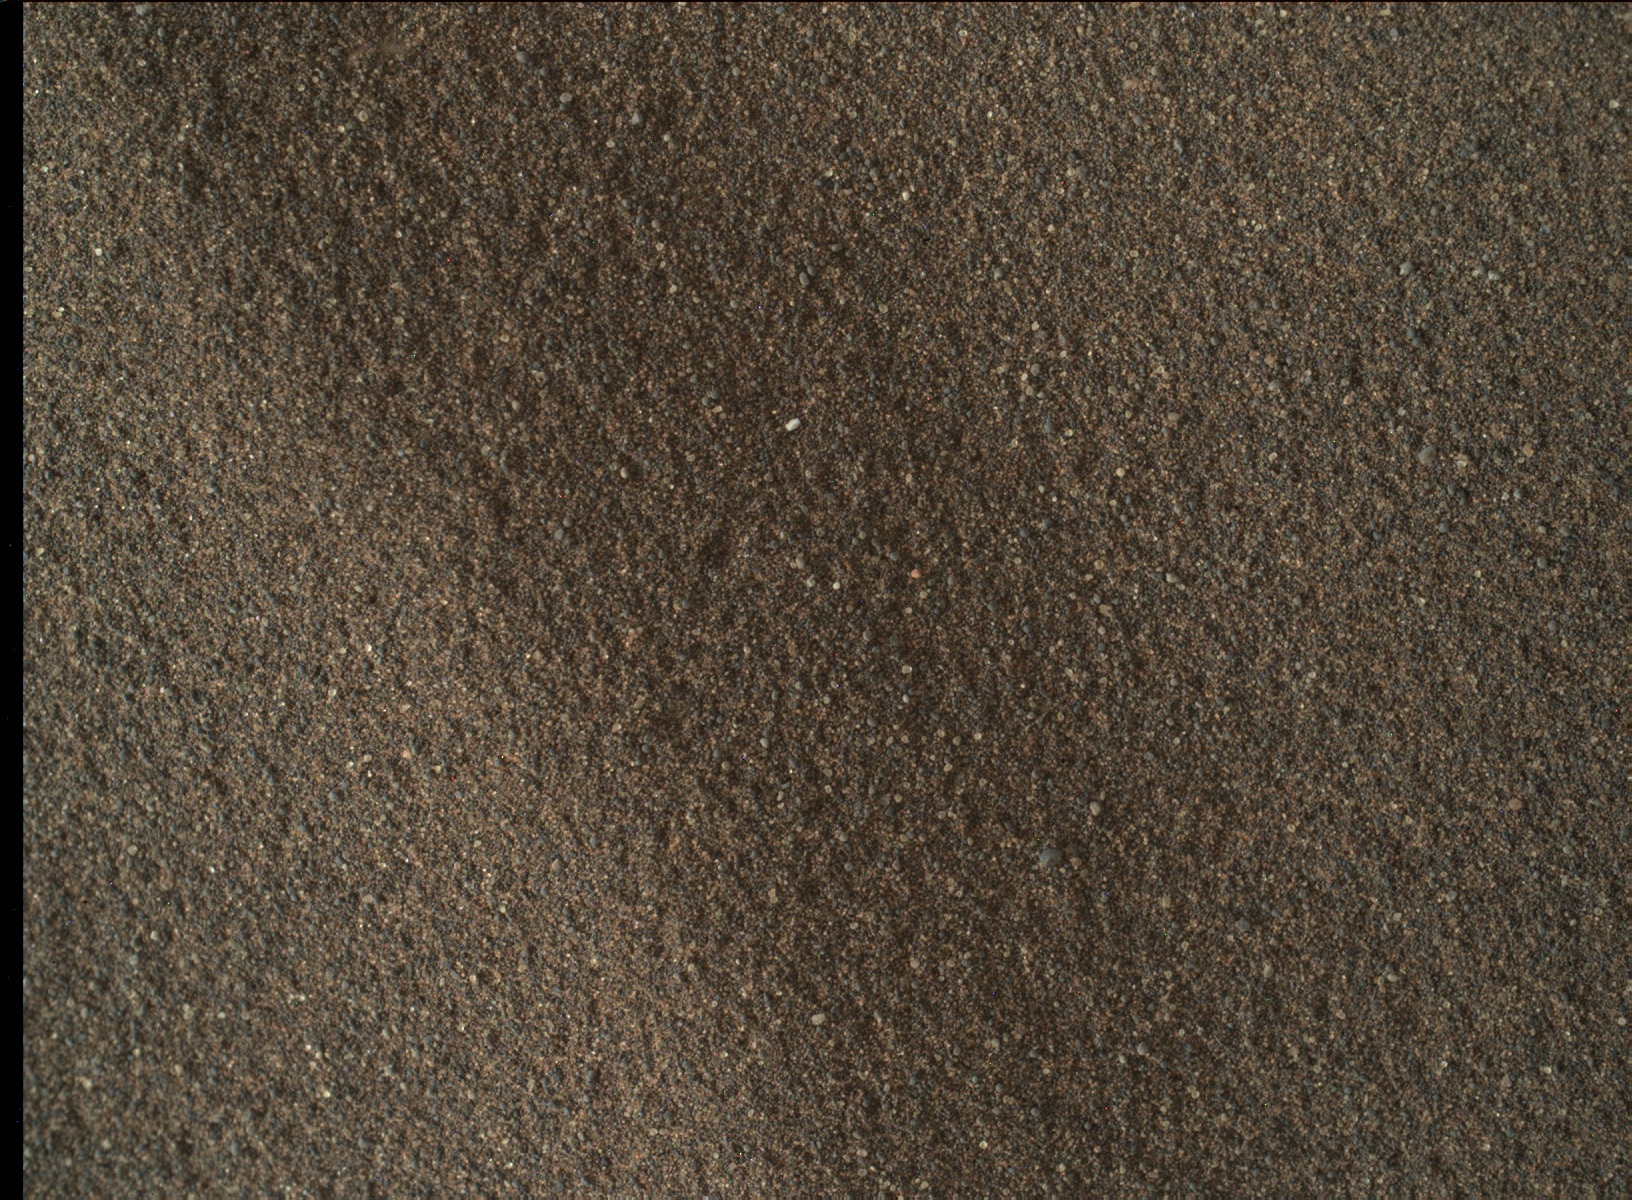 Nasa's Mars rover Curiosity acquired this image using its Mars Hand Lens Imager (MAHLI) on Sol 1902